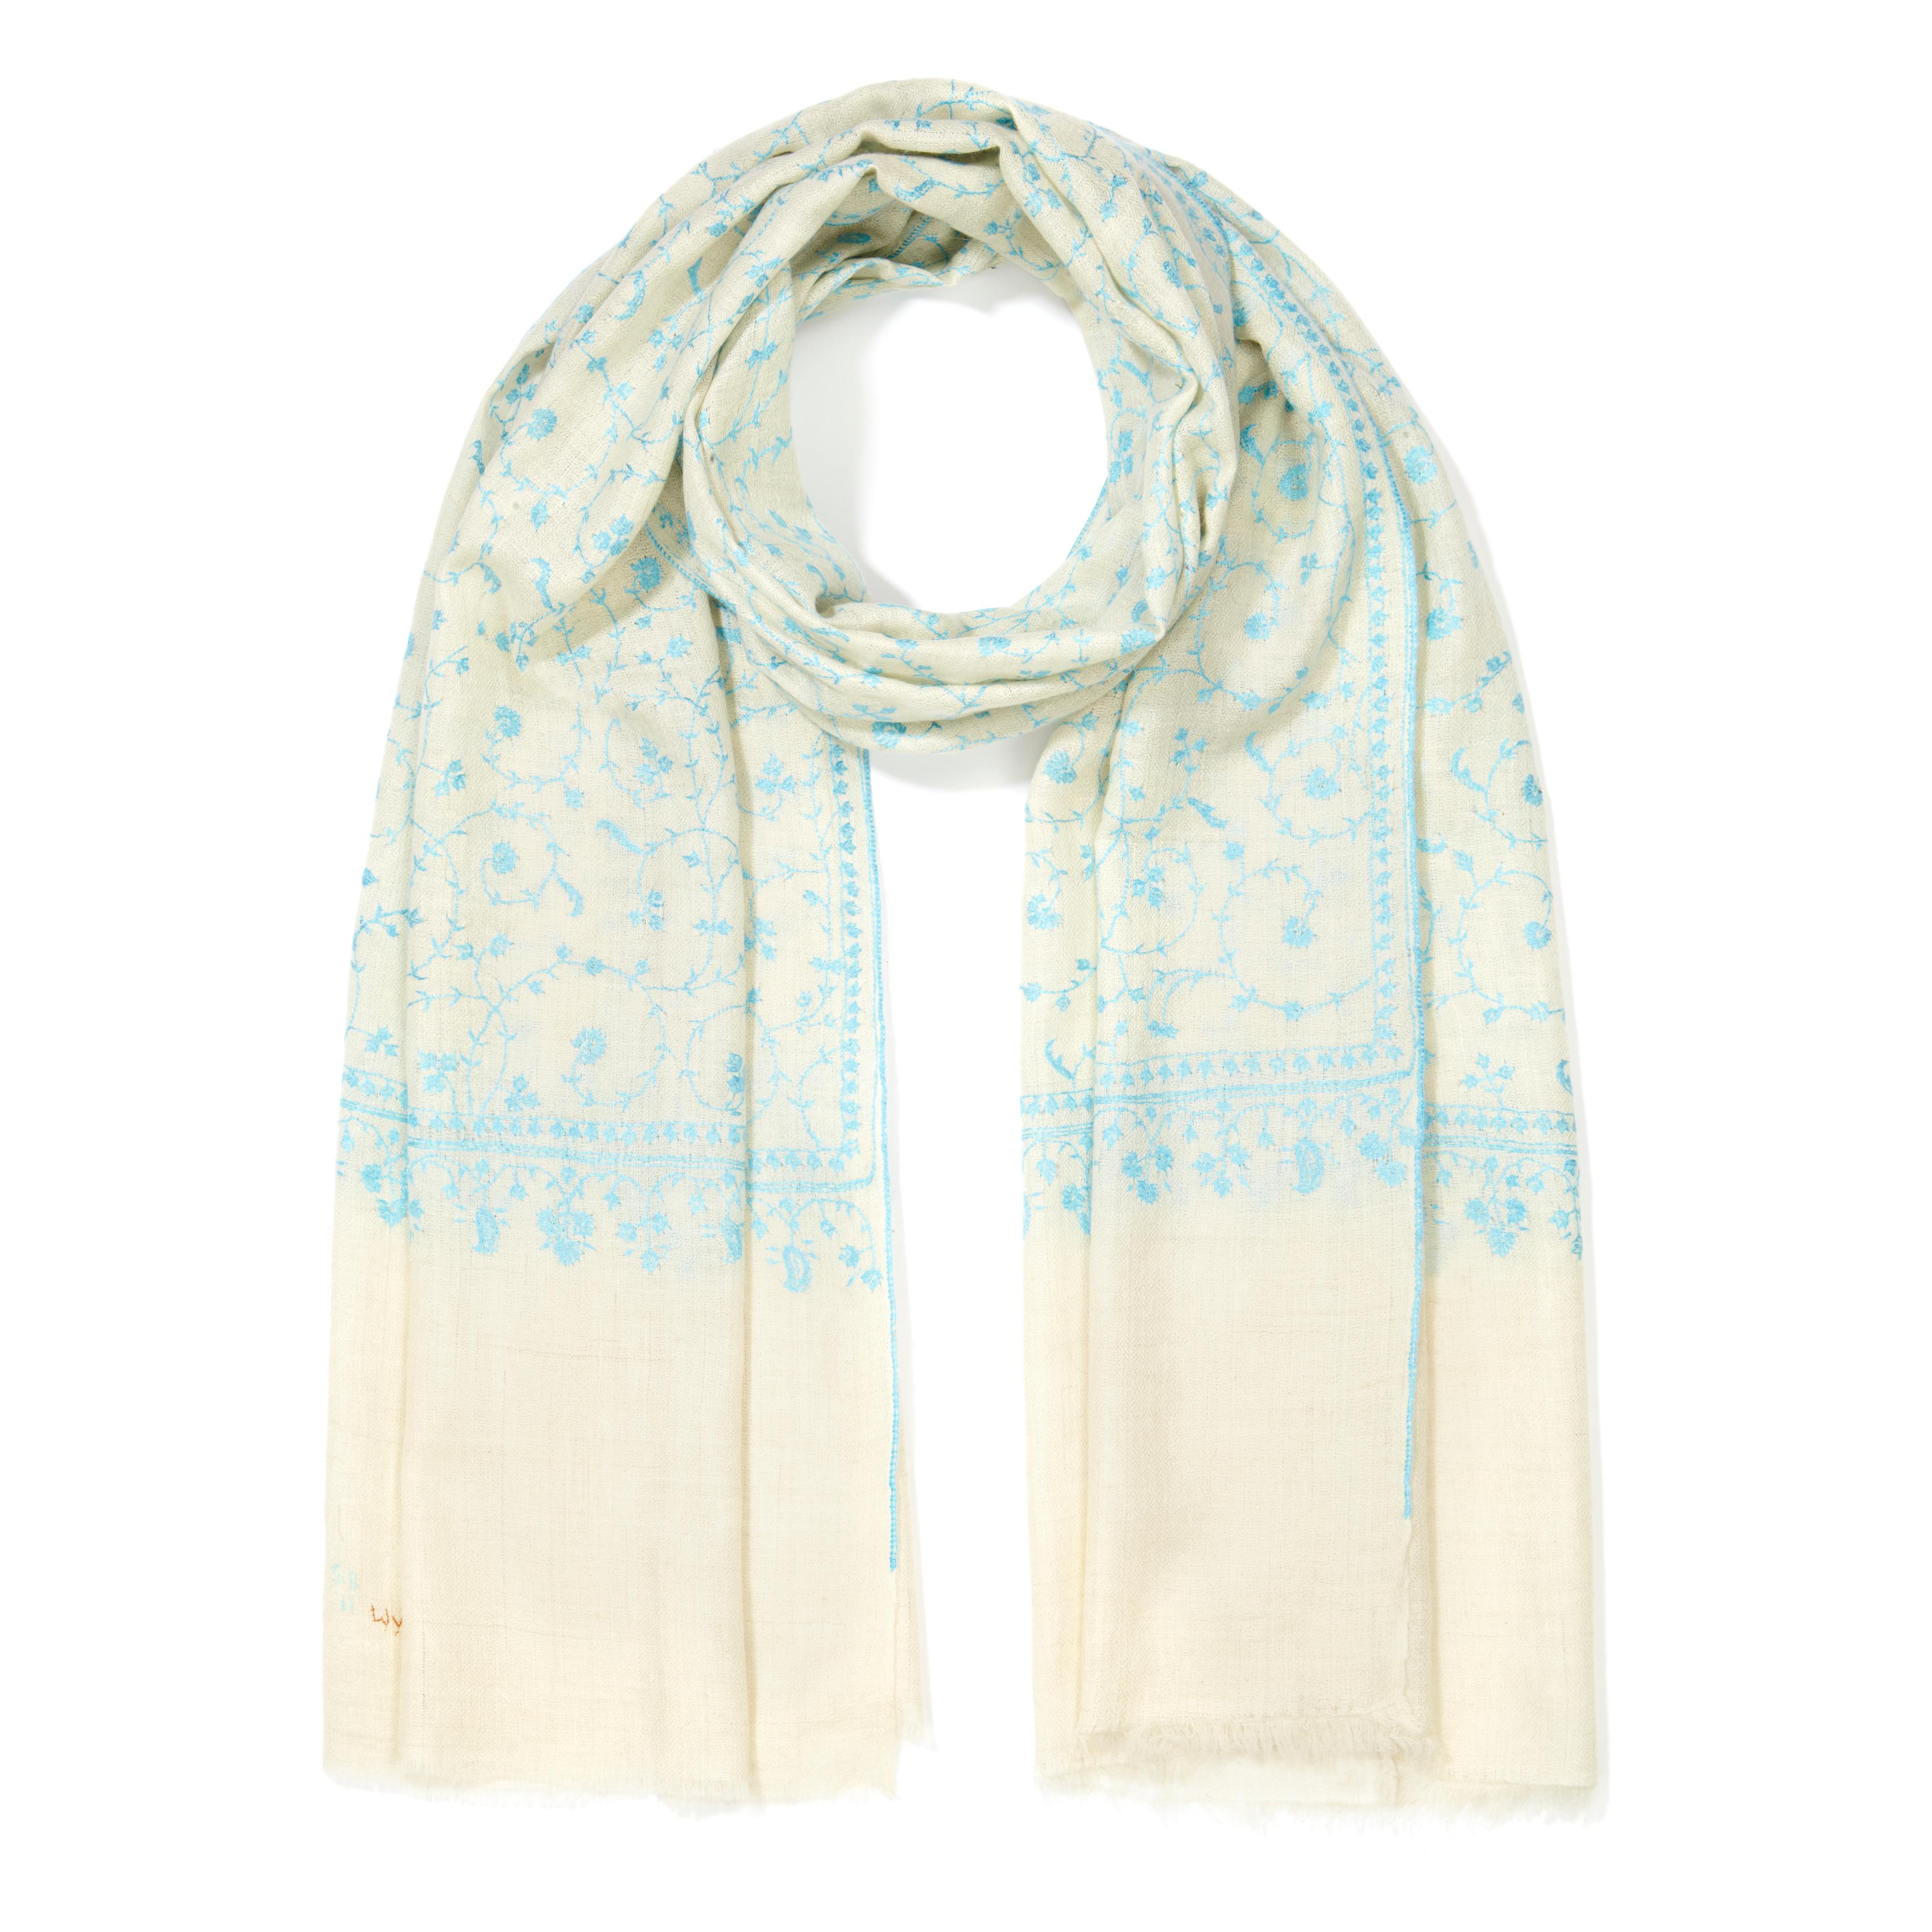 Limited Edition Hand Embroidered Cashmere Shawl in Ivory & Blue Made in Kashmir (Weiß)